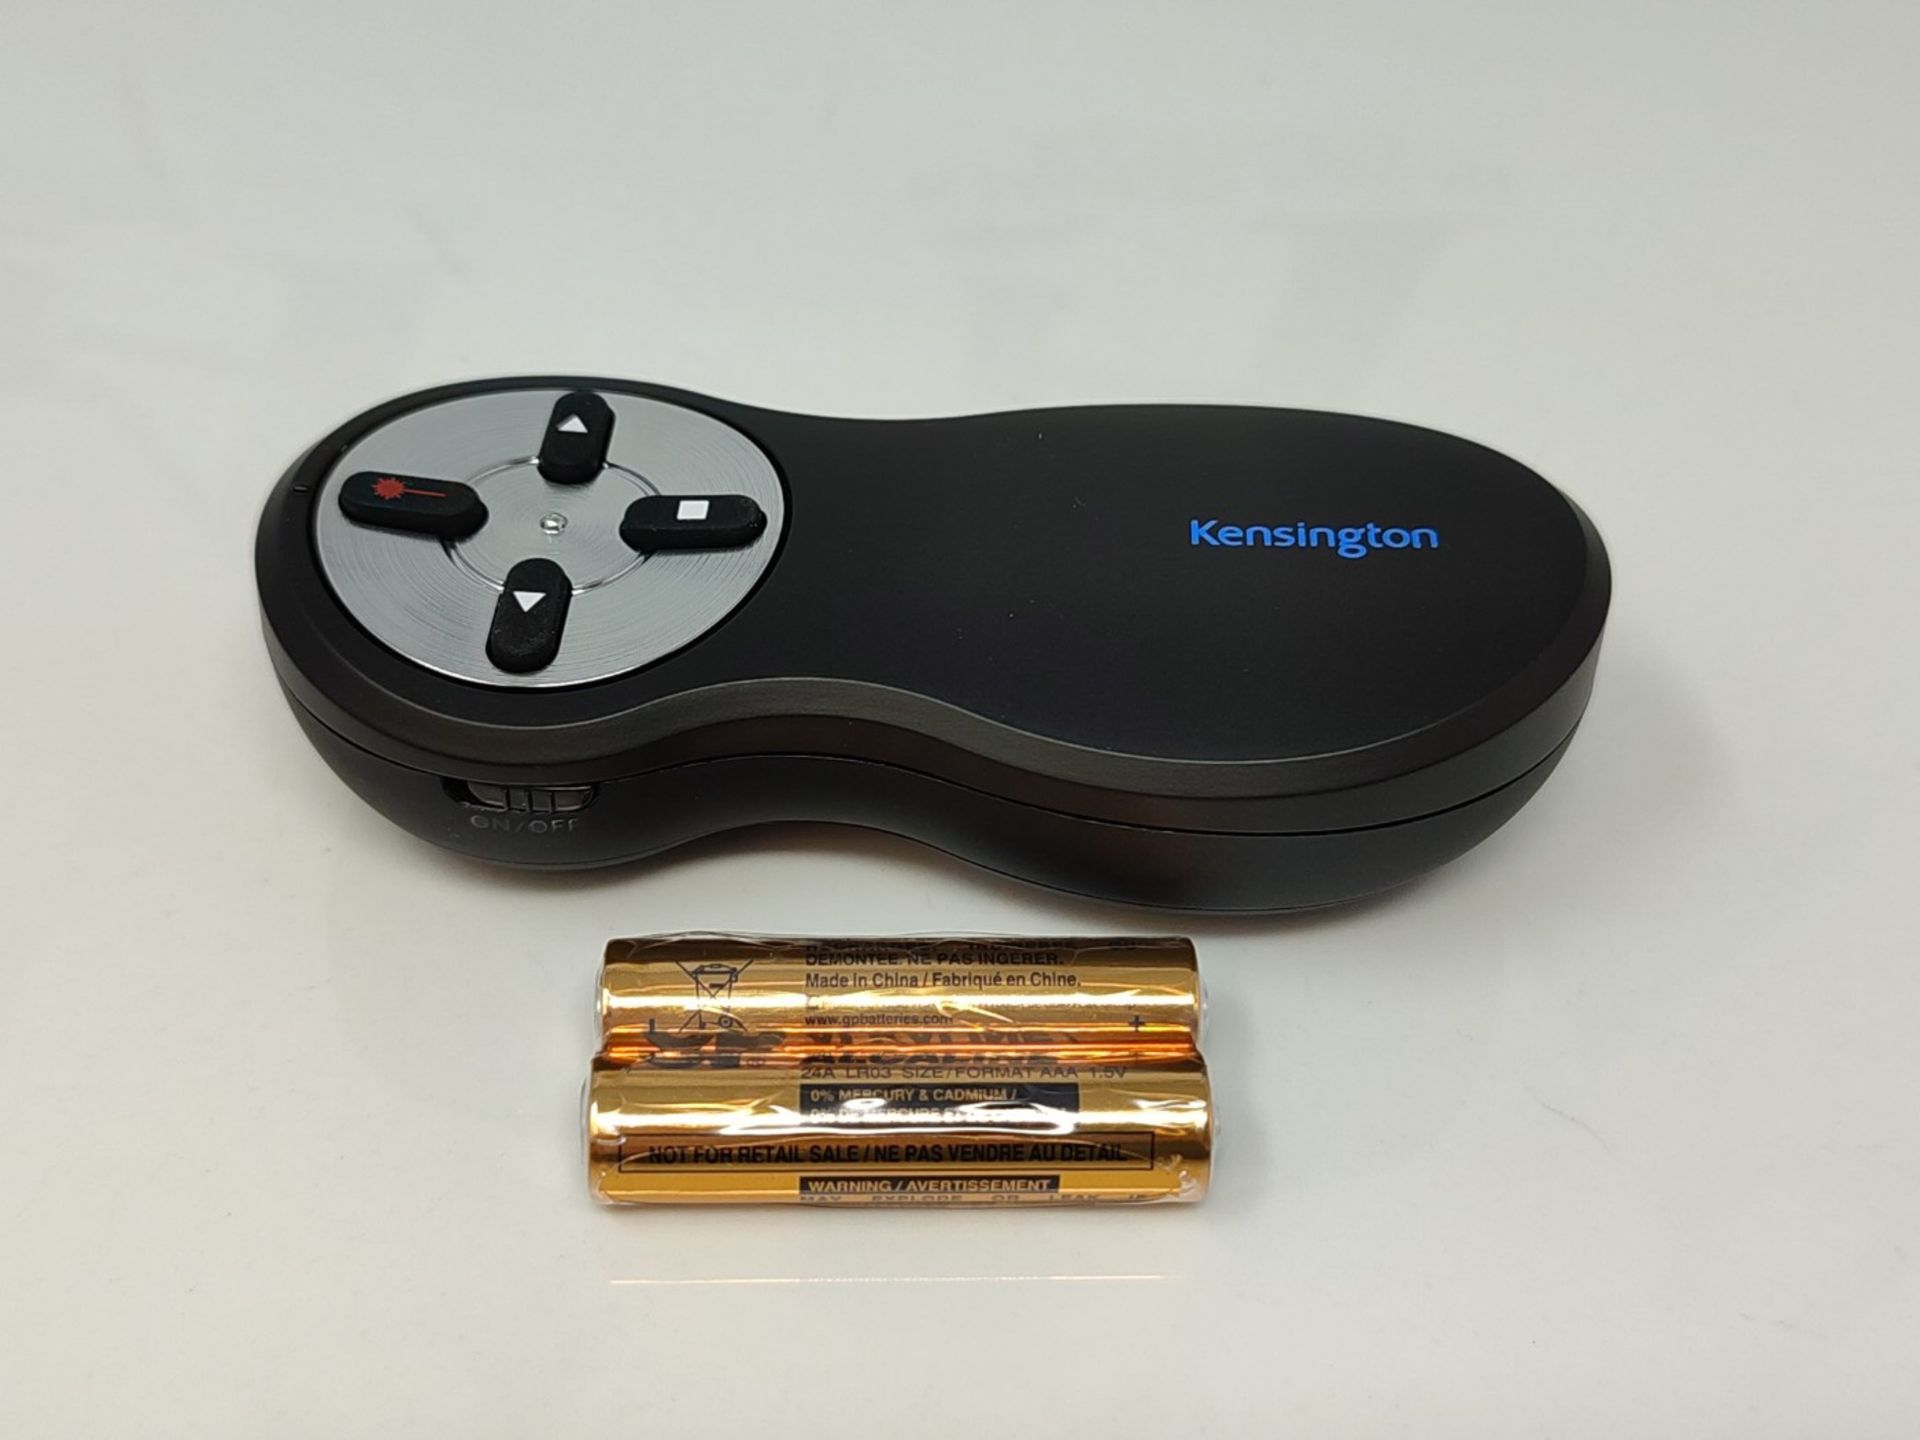 Kensington Wireless USB Powerpoint Presentation Clicker with Red Laser Pointer, Compat - Image 3 of 3